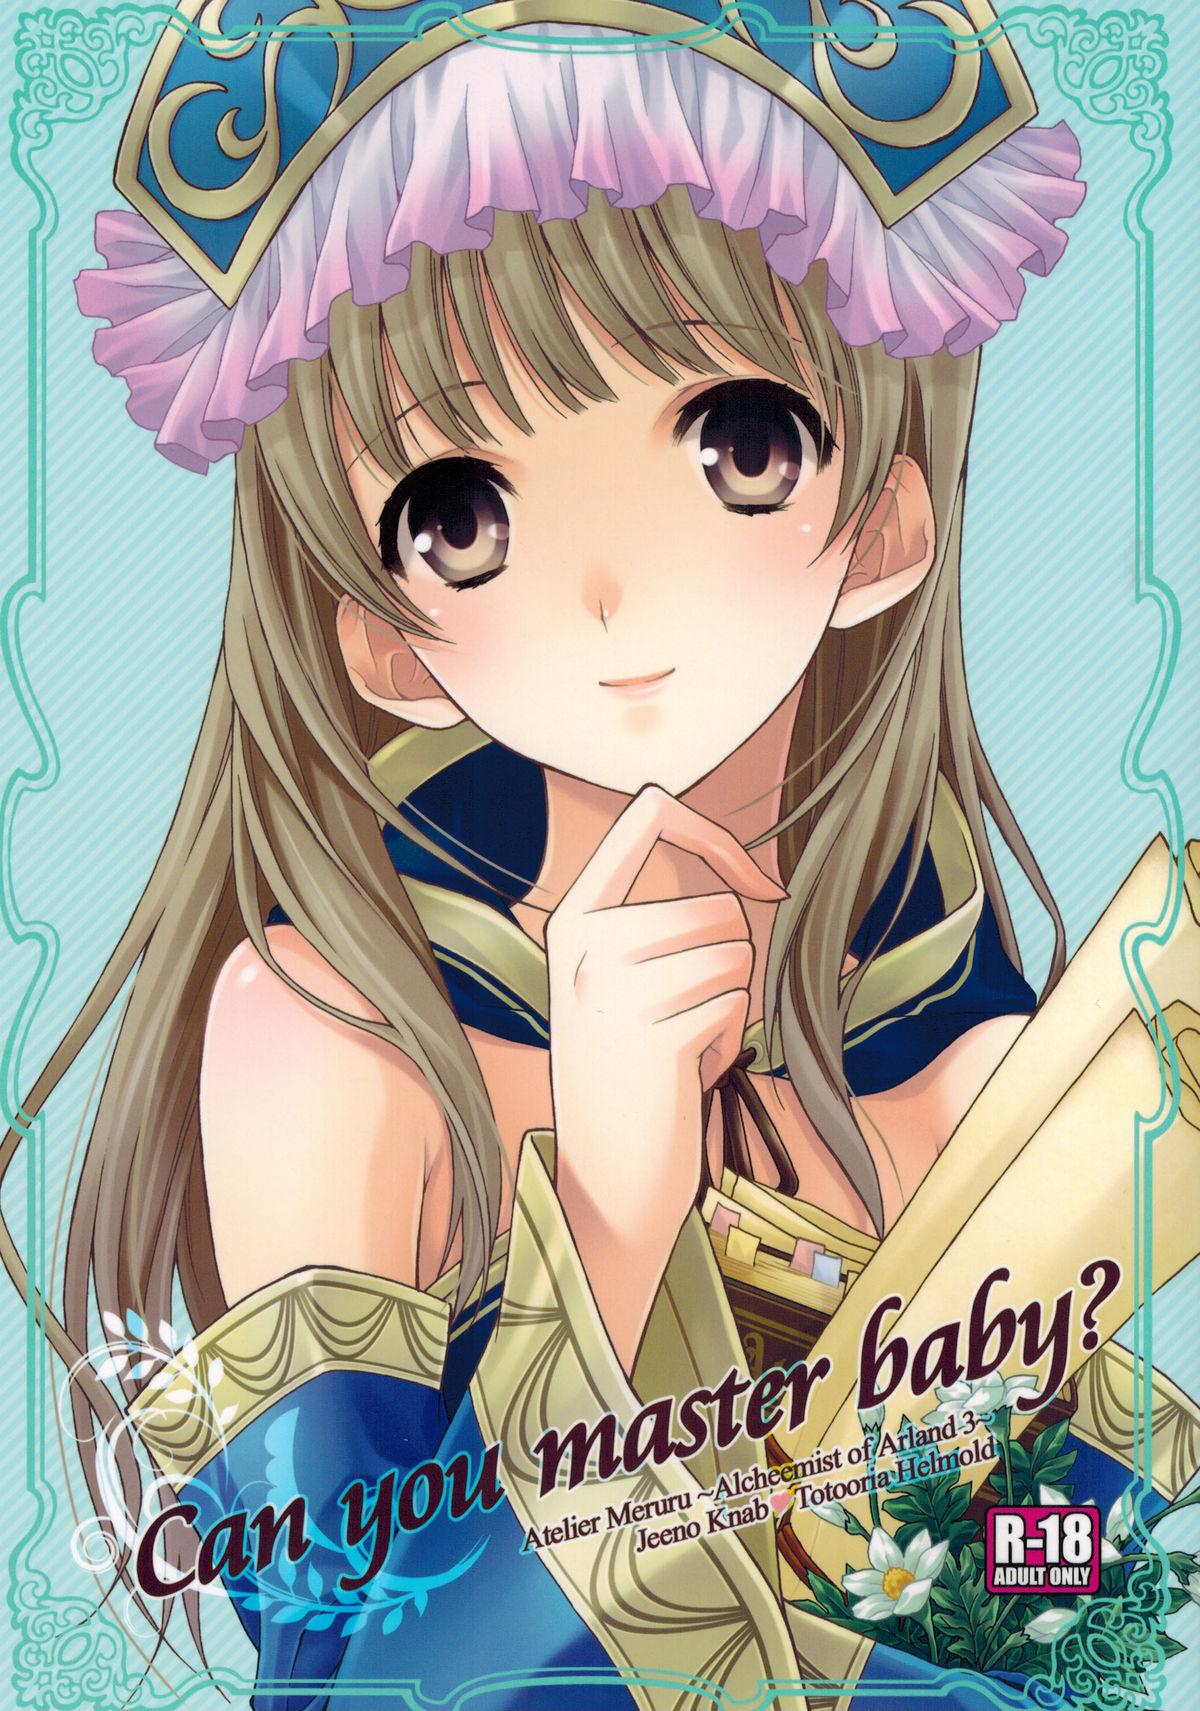 Work Can you master baby? - Atelier totori Atelier meruru Celebrity - Page 1